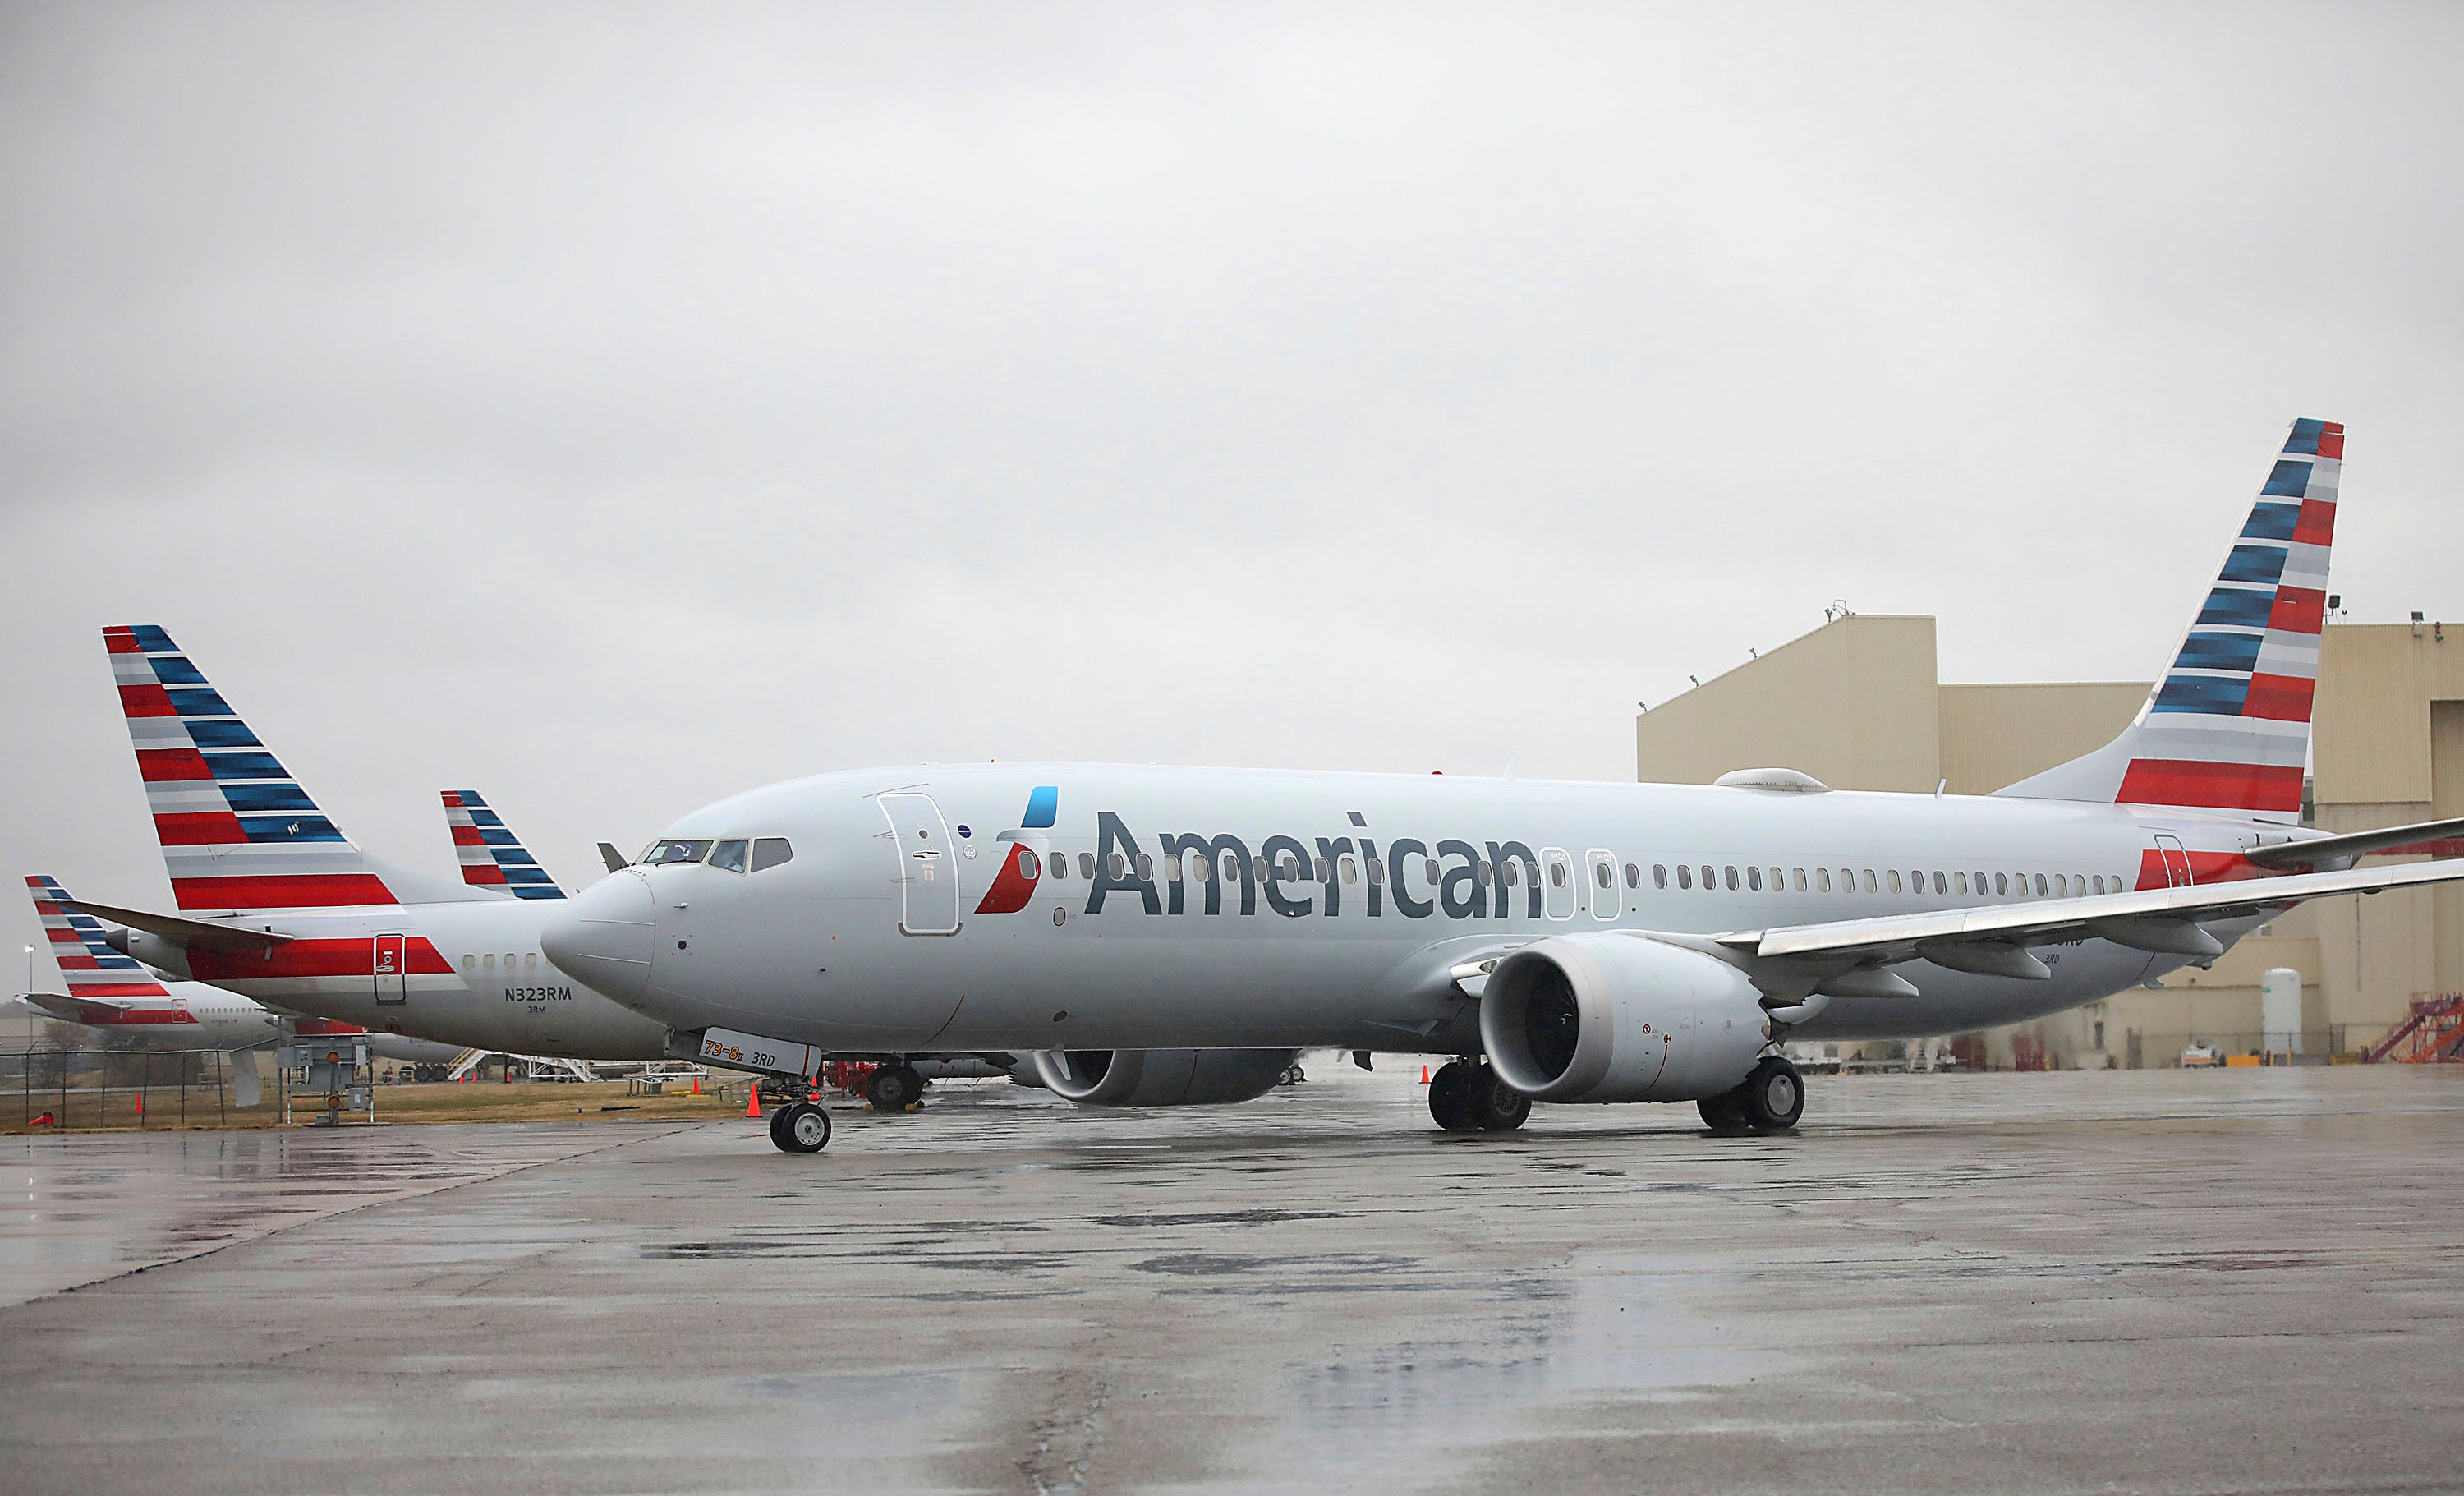 American Airlines was forced to give a statement about the incident